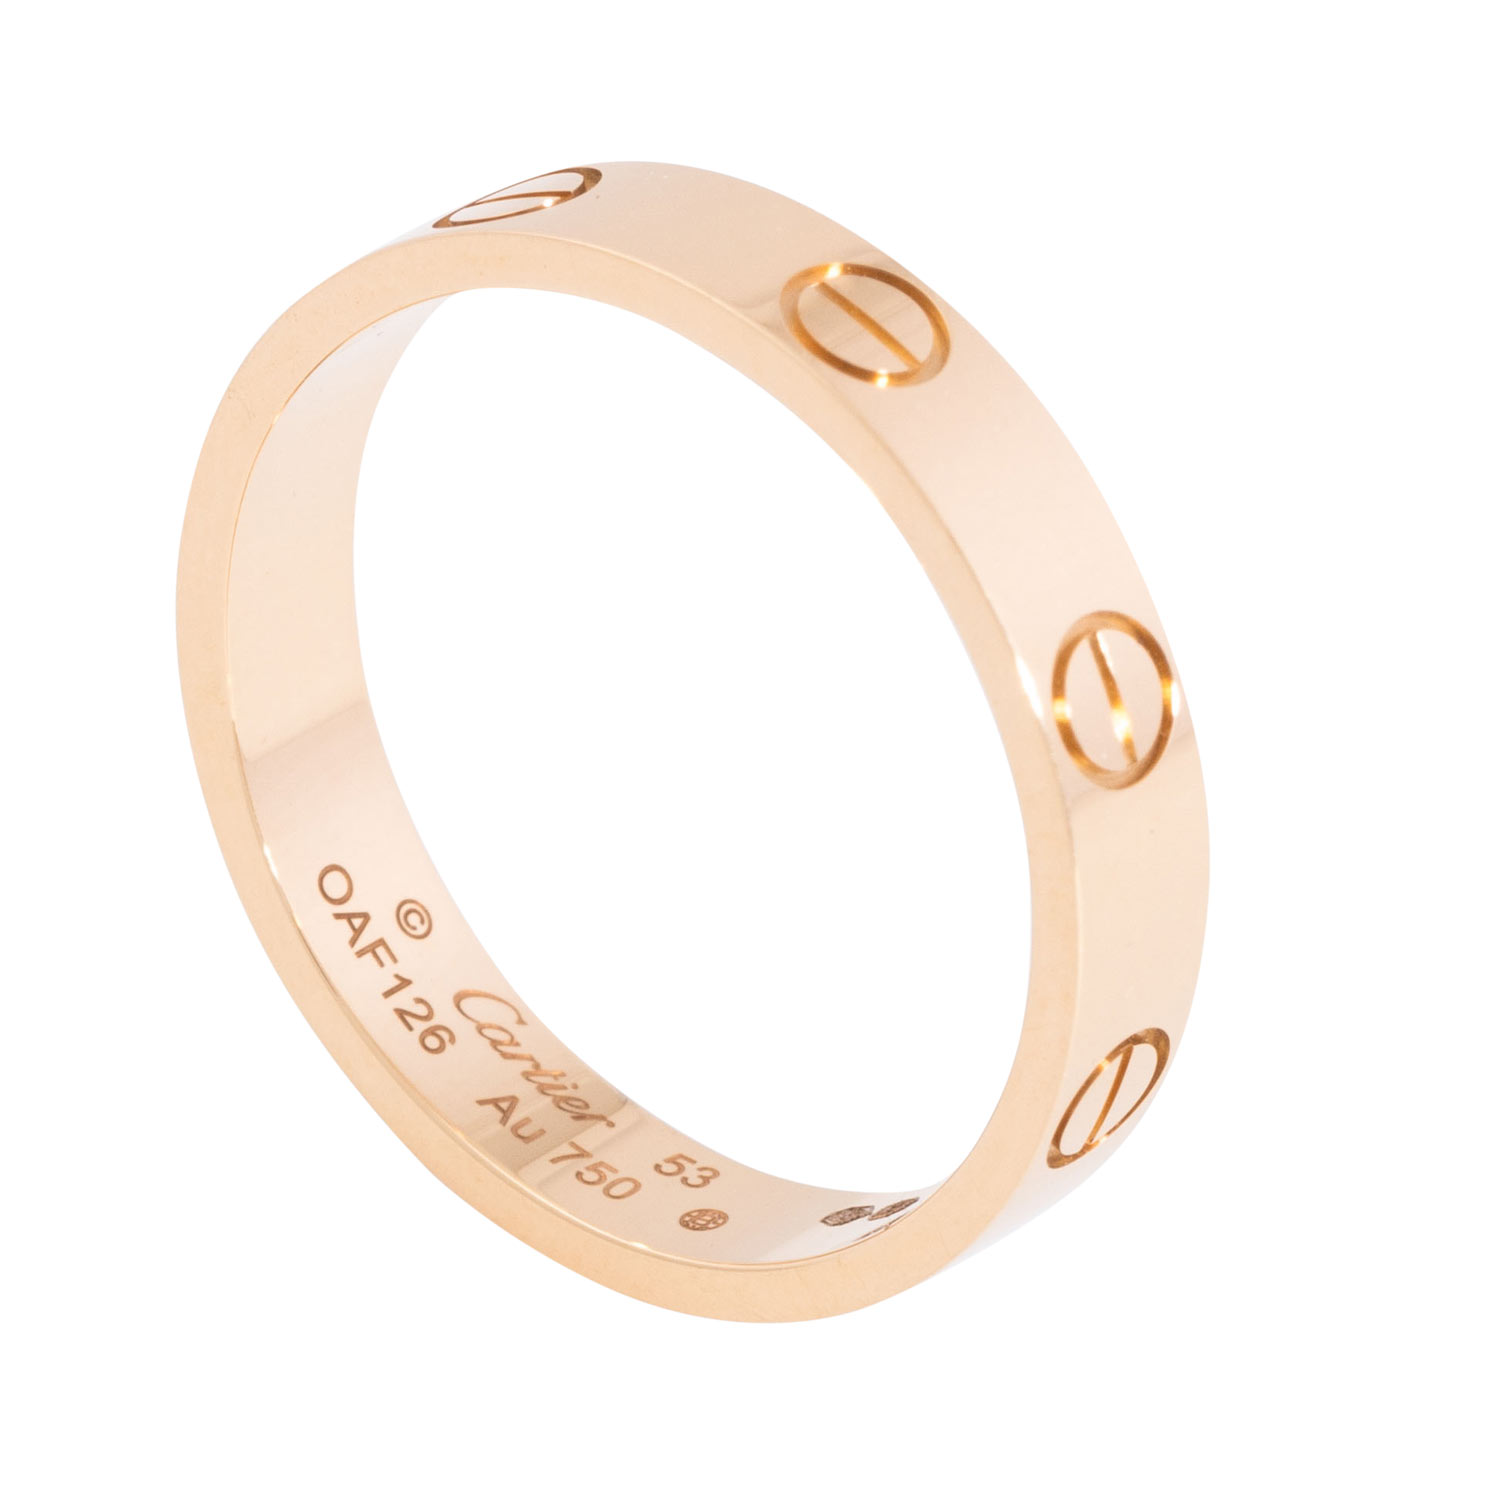 CARTIER Ring "Love", - Image 4 of 4